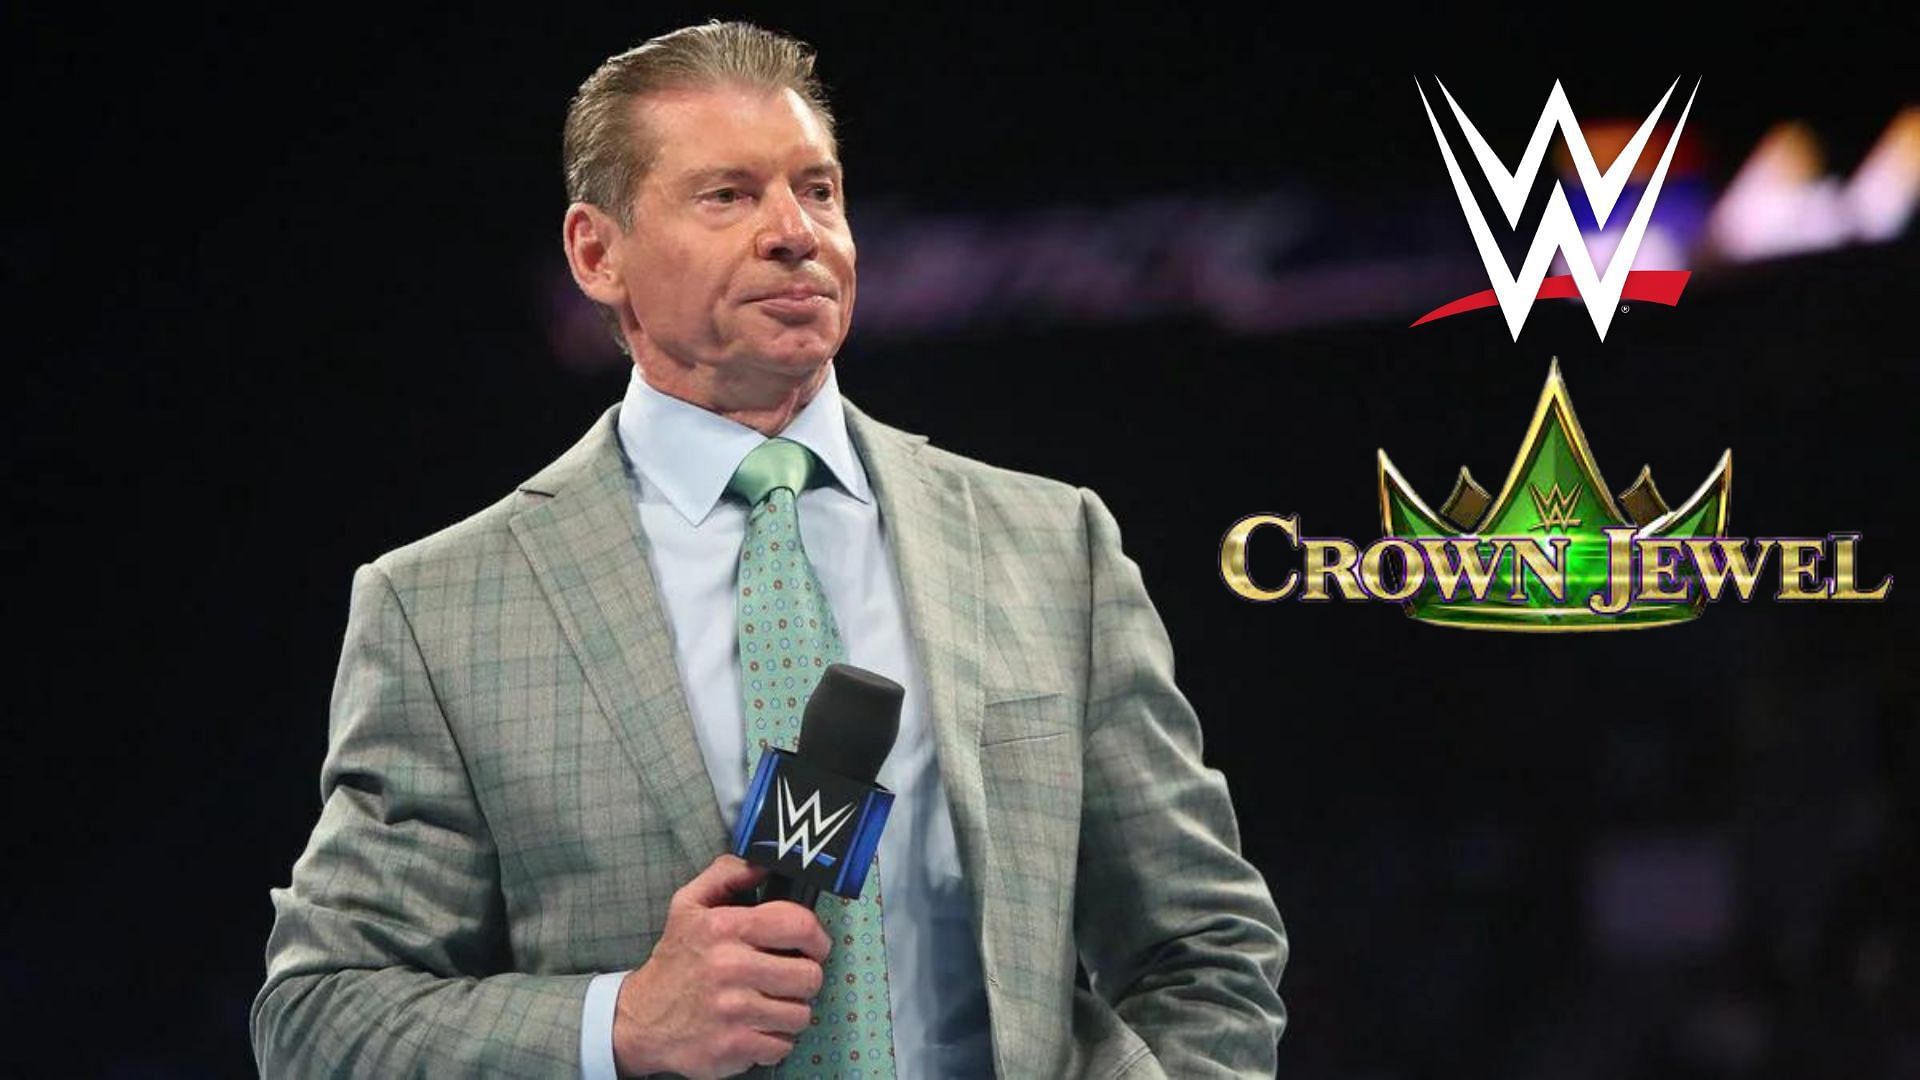 Vince McMahon returned to WWE in January